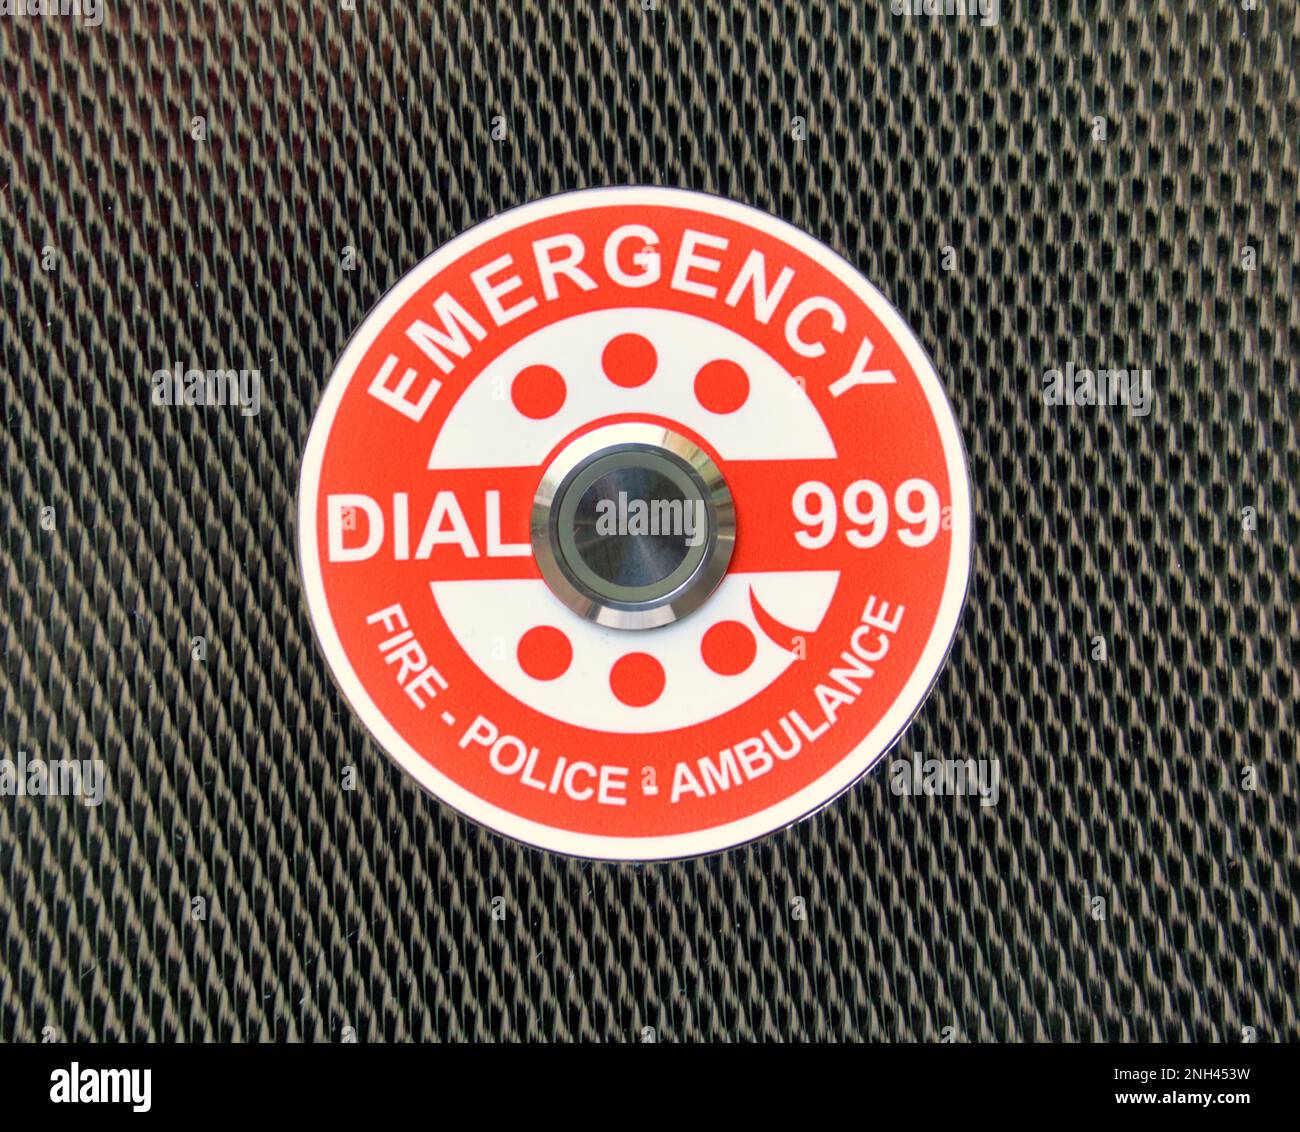 emergency dial 999 fire police ambulance button  on a defibrillator Stock Photo